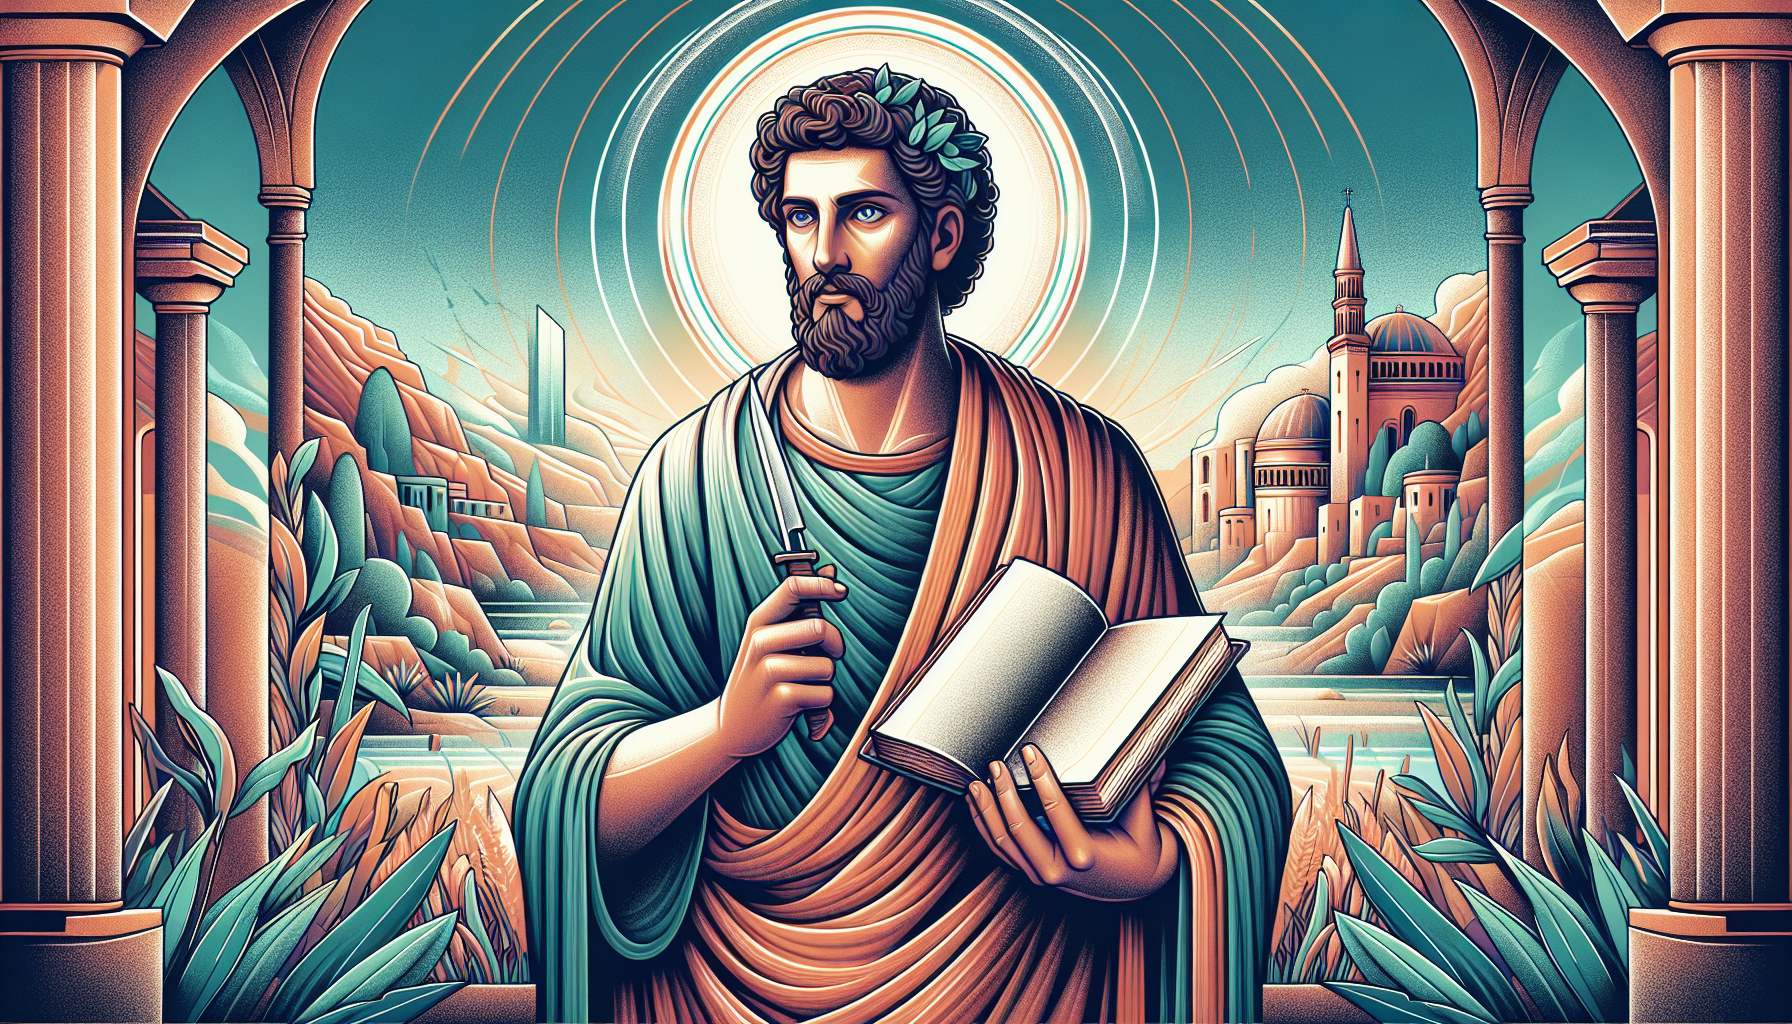 An artistic representation of Saint Bartholomew the Apostle, in a serene and ancient landscape, holding a book and a knife, symbolizing his martyrdom, with a gentle halo around his head and a subtly g